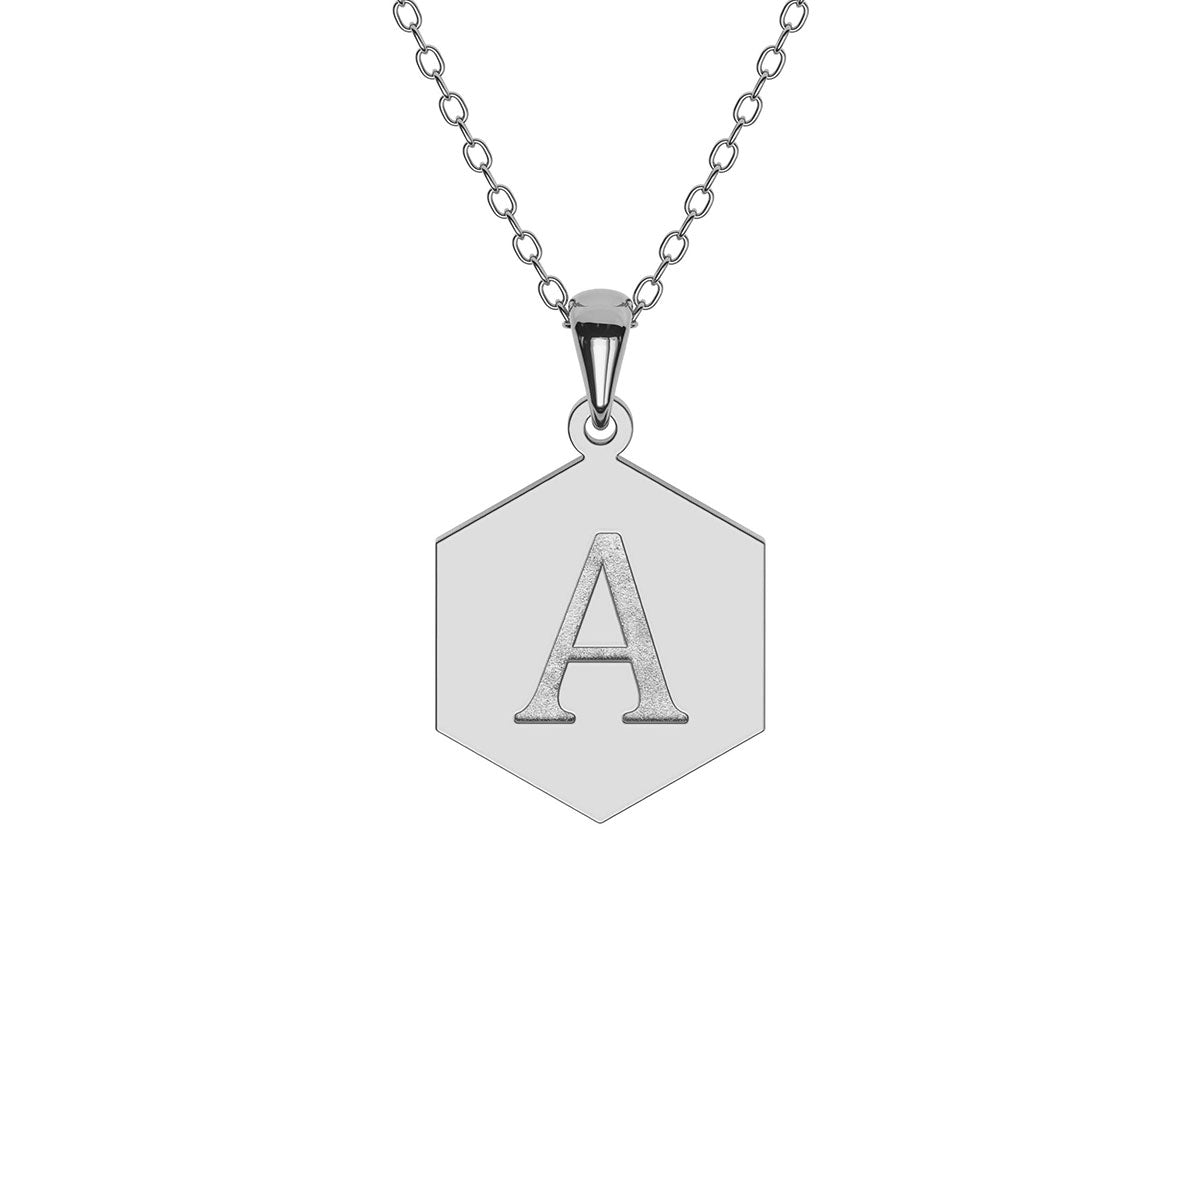 Hexagonal Personalized Initial Necklace